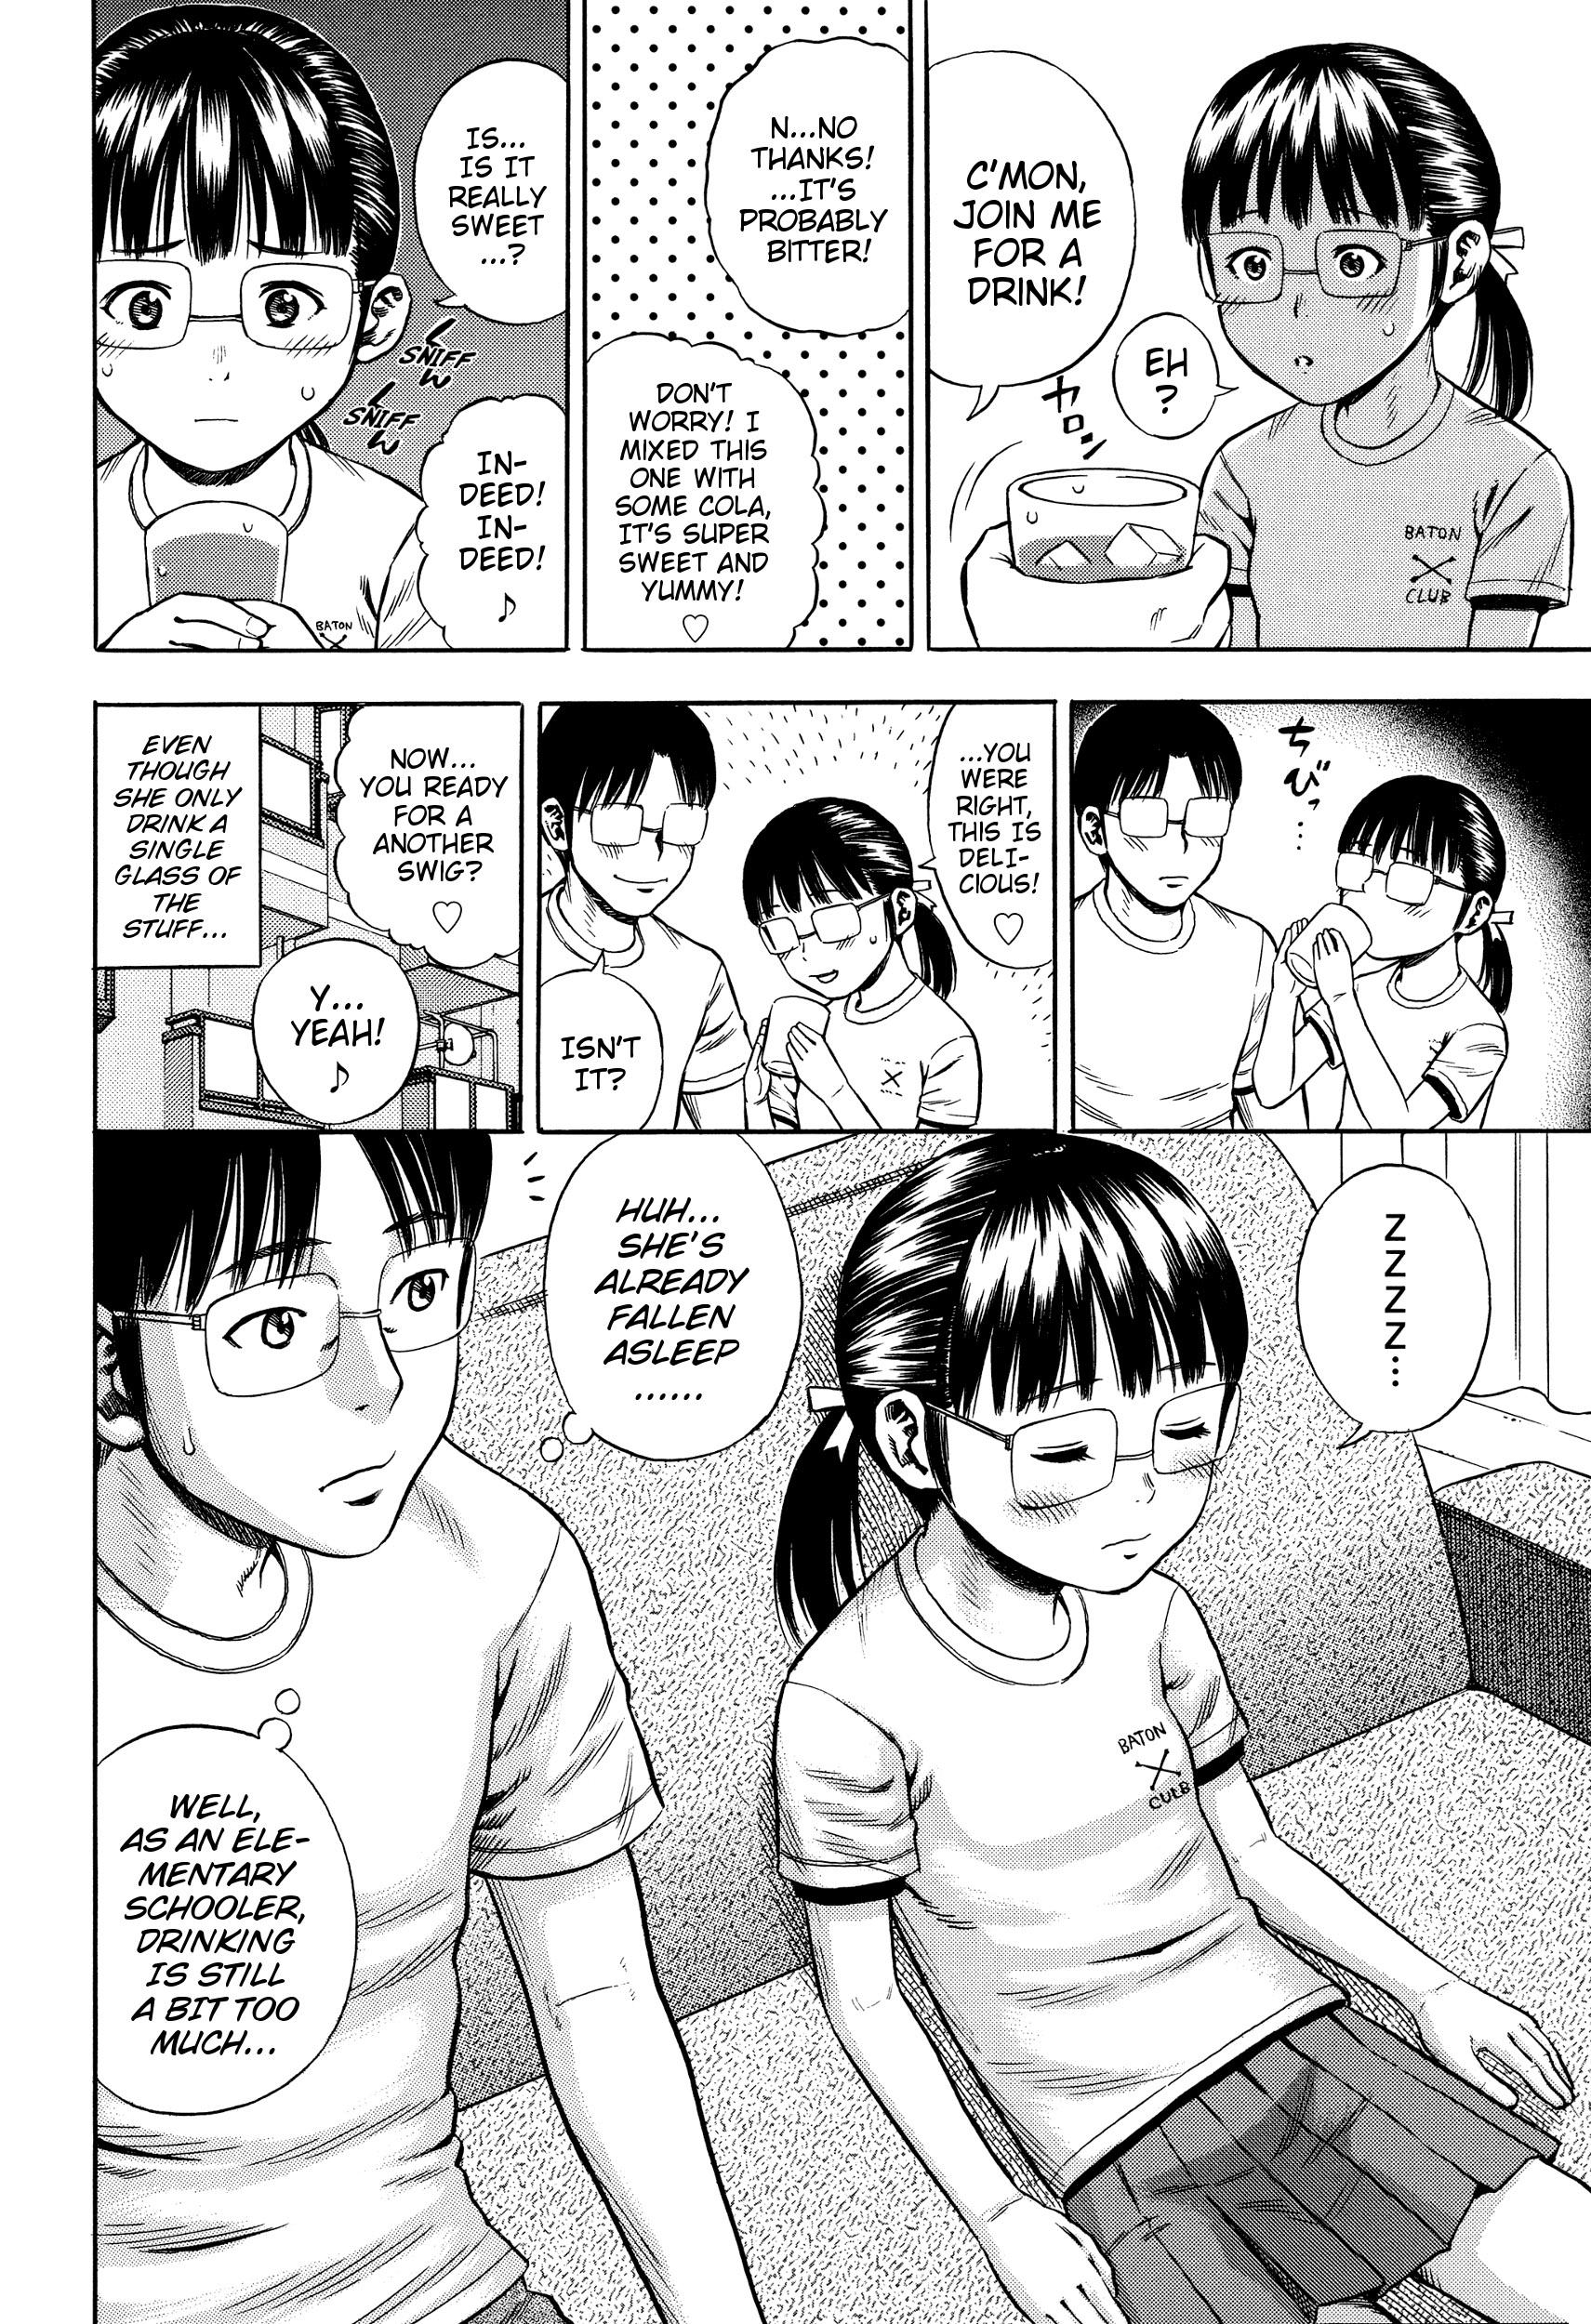 Nasty Free Porn Uchi no Imouto ga Warito Kawaii | My Little Sister Is Relatively Cute Rimjob - Page 4